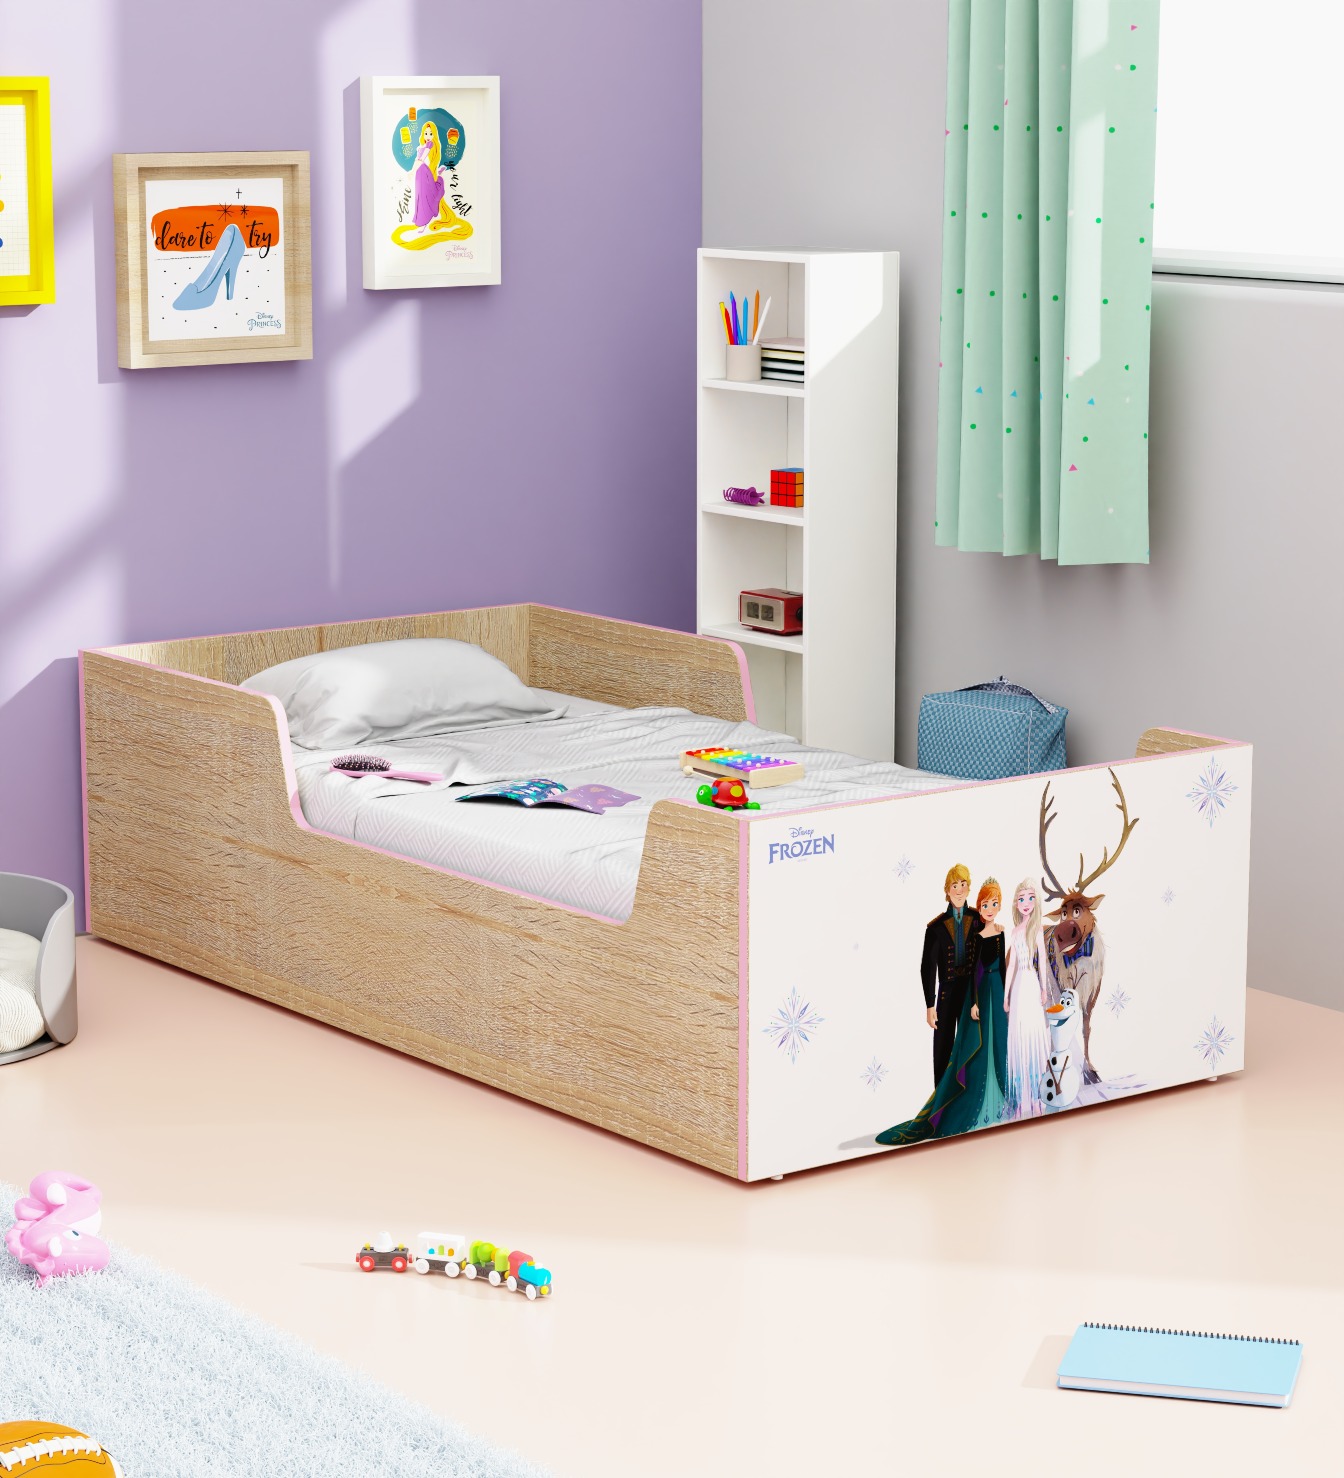 Boingg Dreampod Frozen Engineered Wood Single Bed for Kids in Oak & White Colour with Box Storage